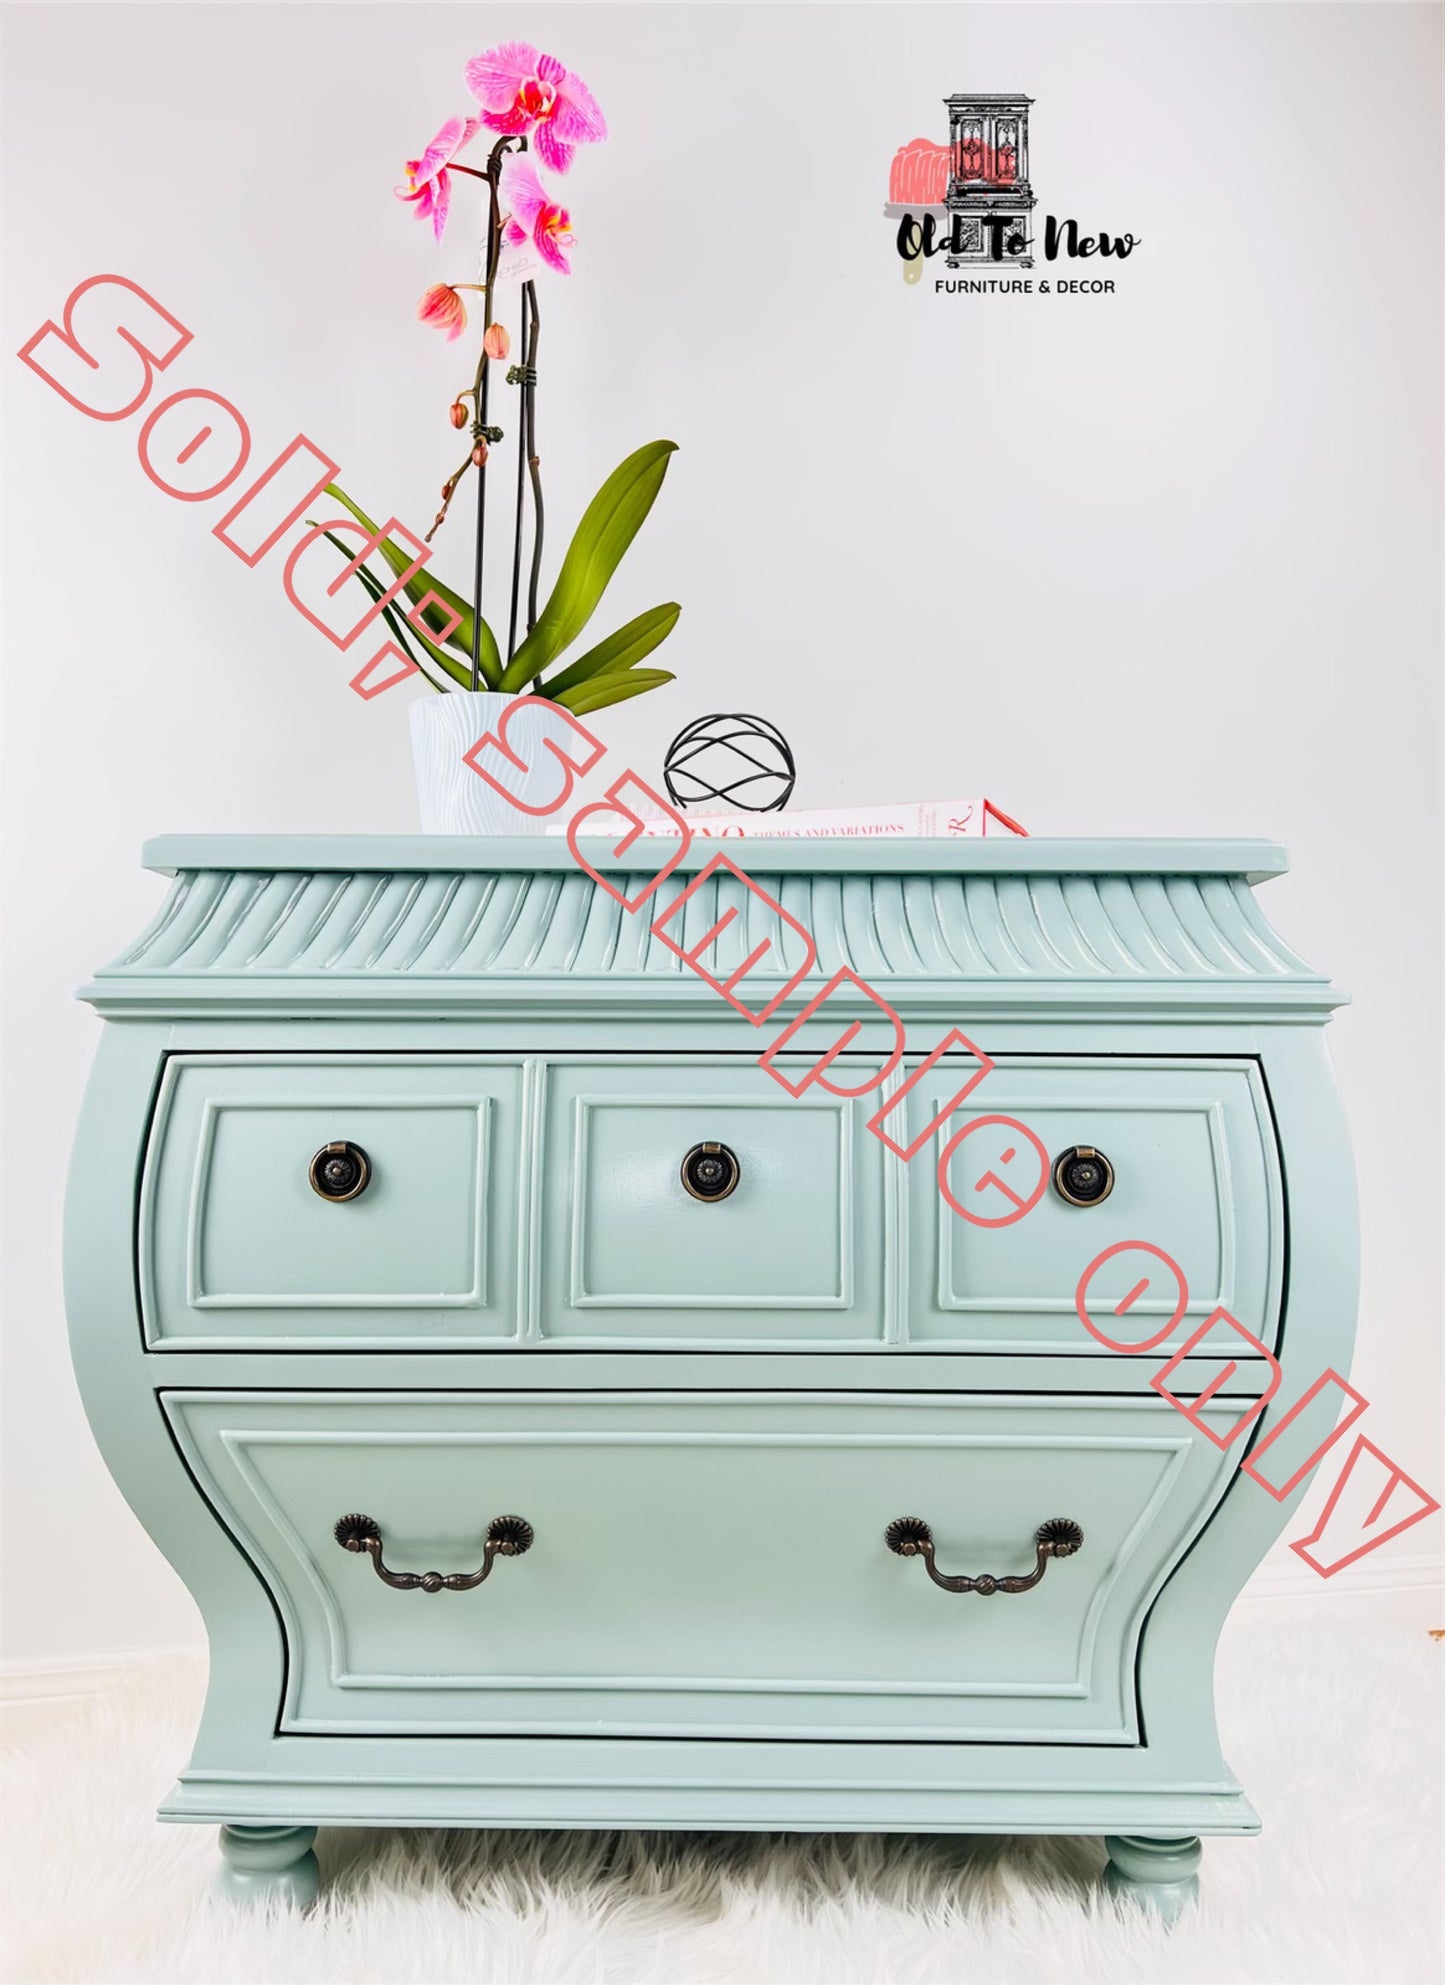 Sample Painted Bombay Table; Old to New Furniture & Decor